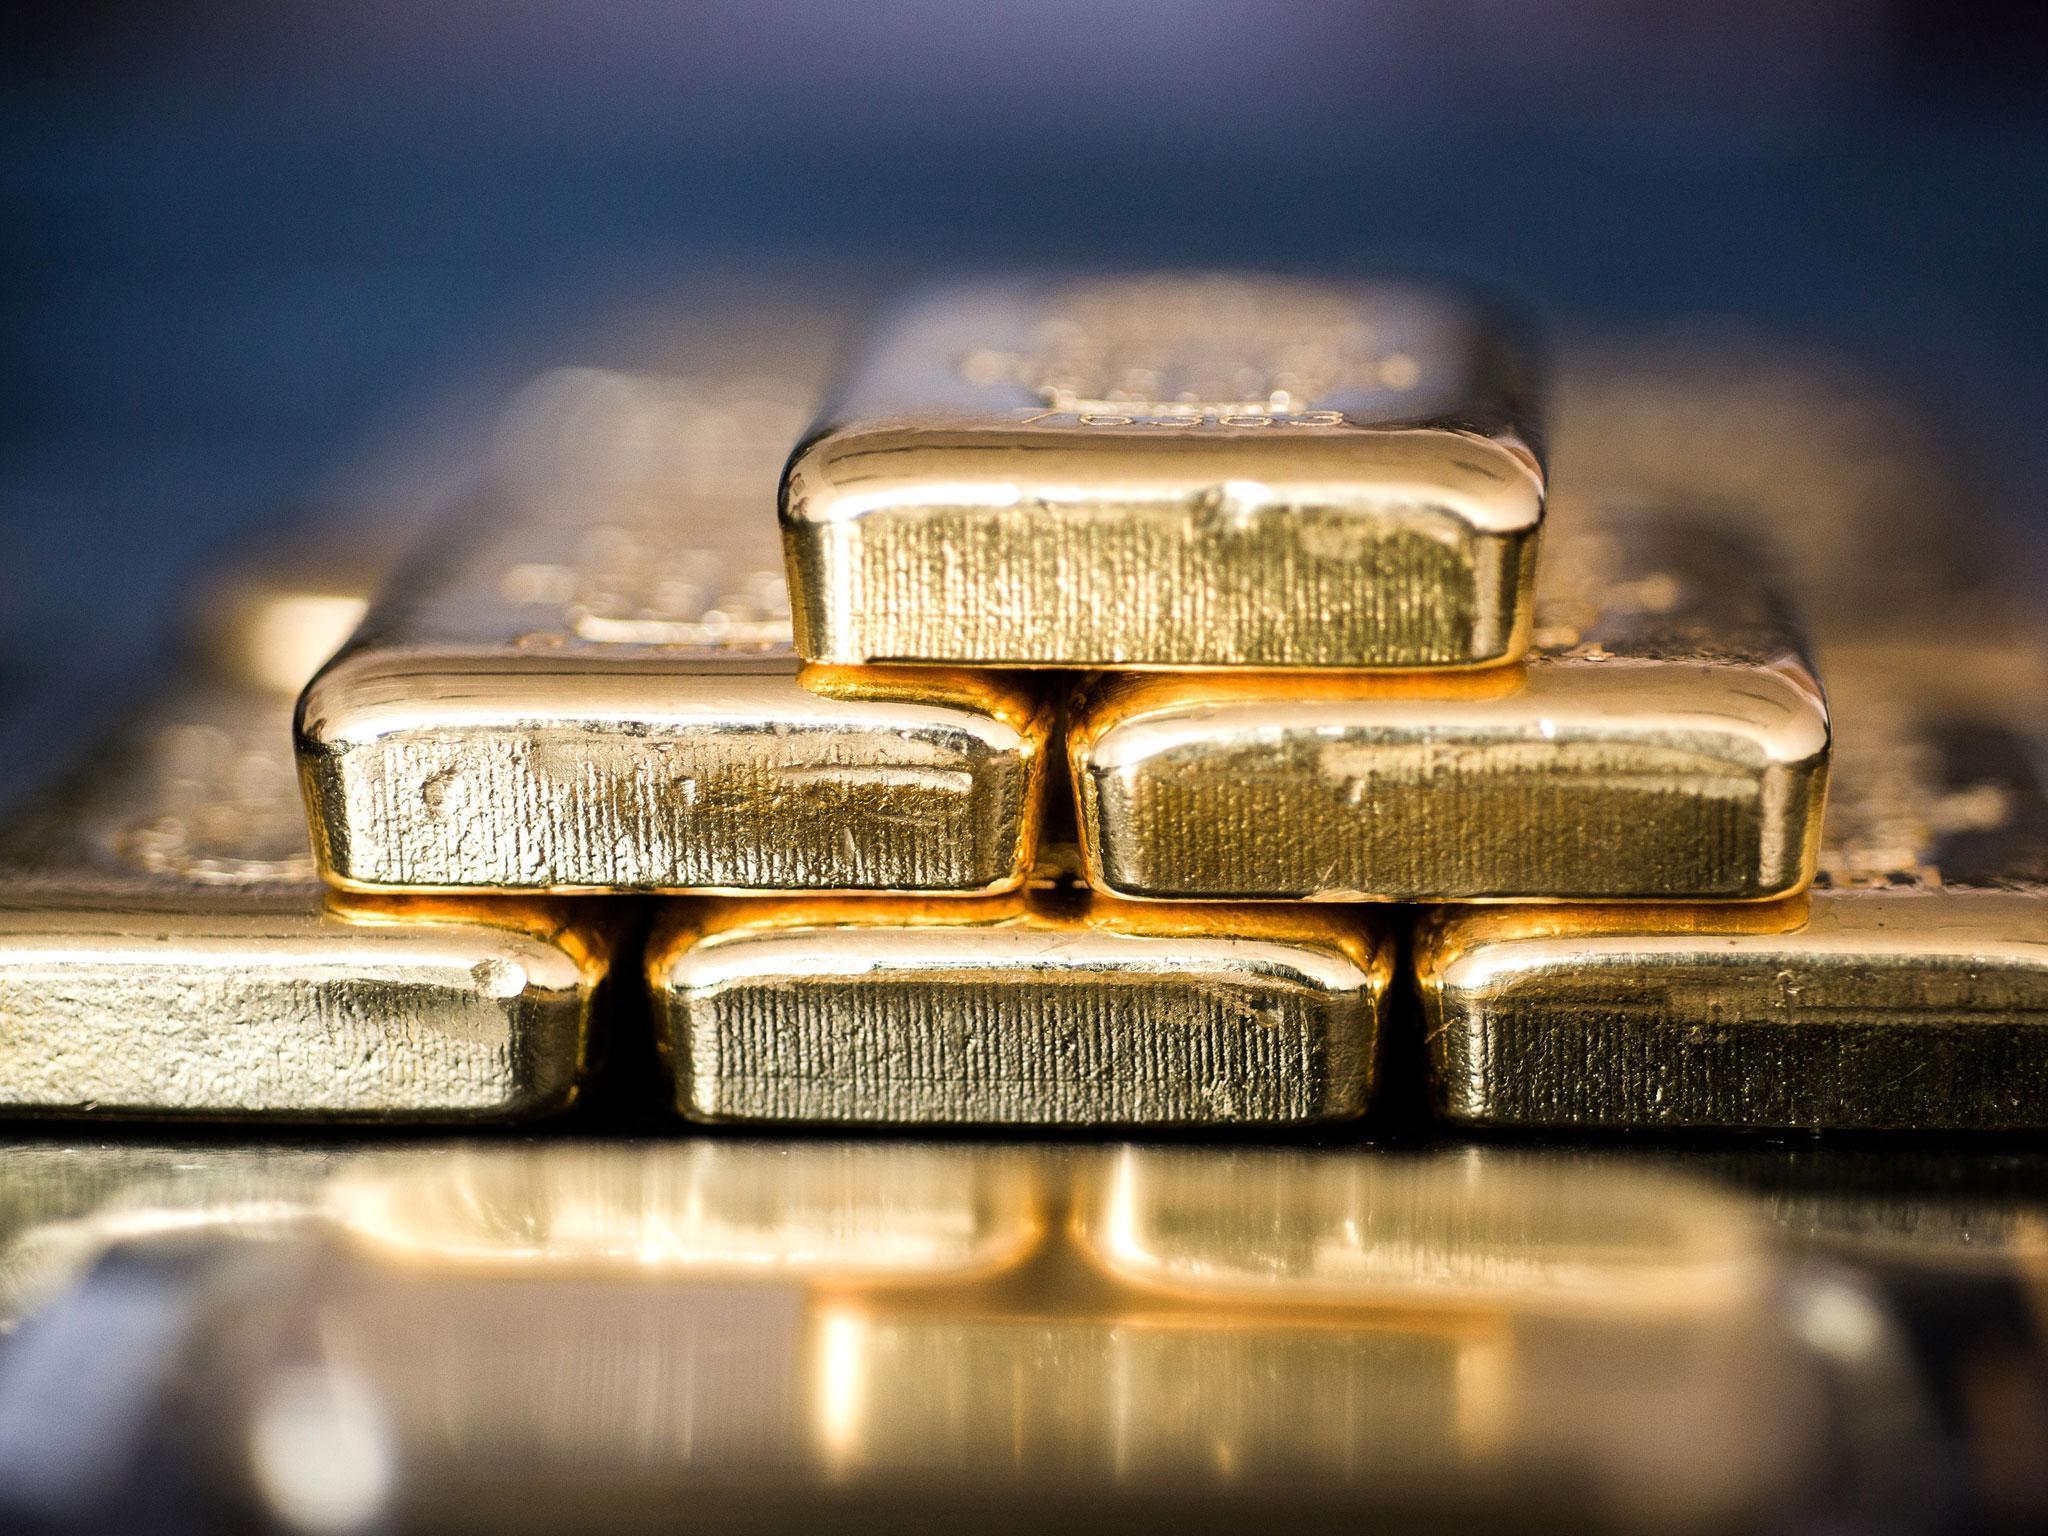 The surging gold price clearly shows the panic sweeping financial markets, according to Adrian Ash, head of Research at BullionVault.com